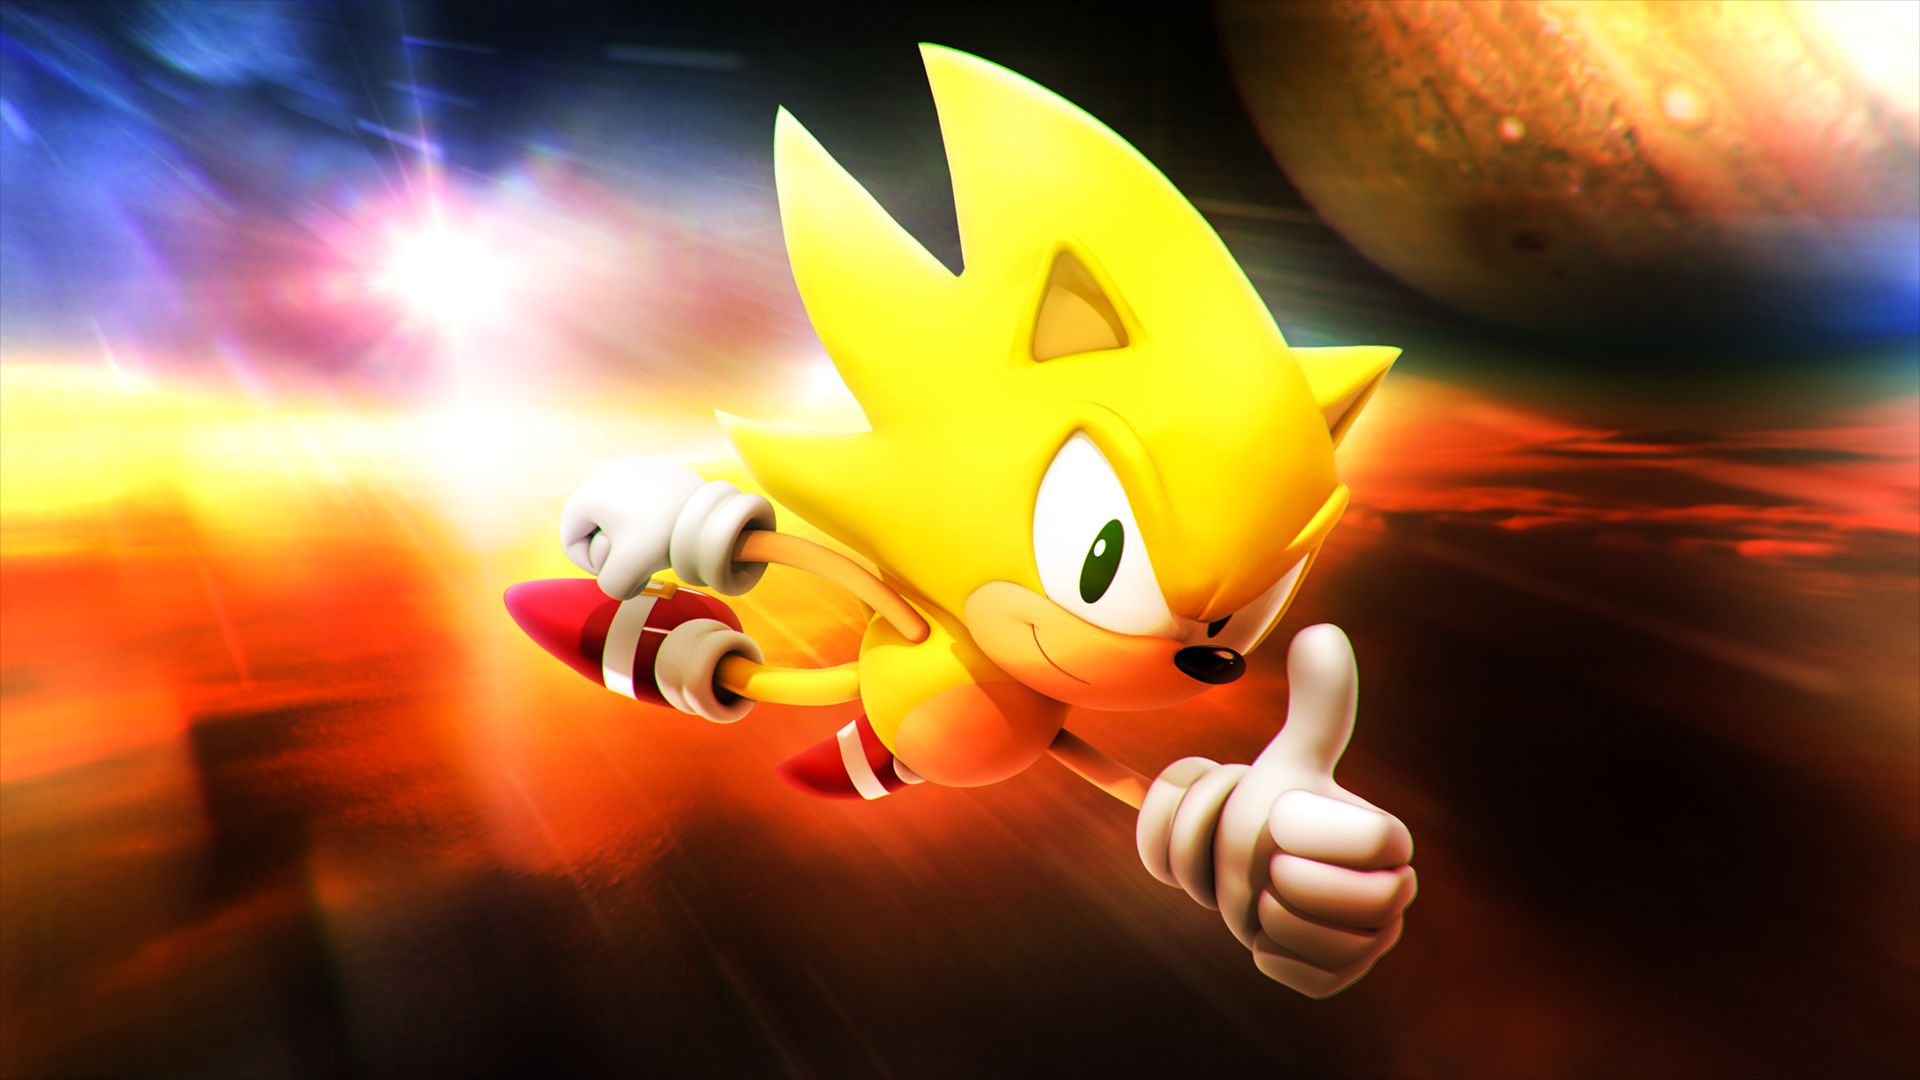 super sonic, video game, sonic the hedgehog (1991), sonic the hedgehog, sonic